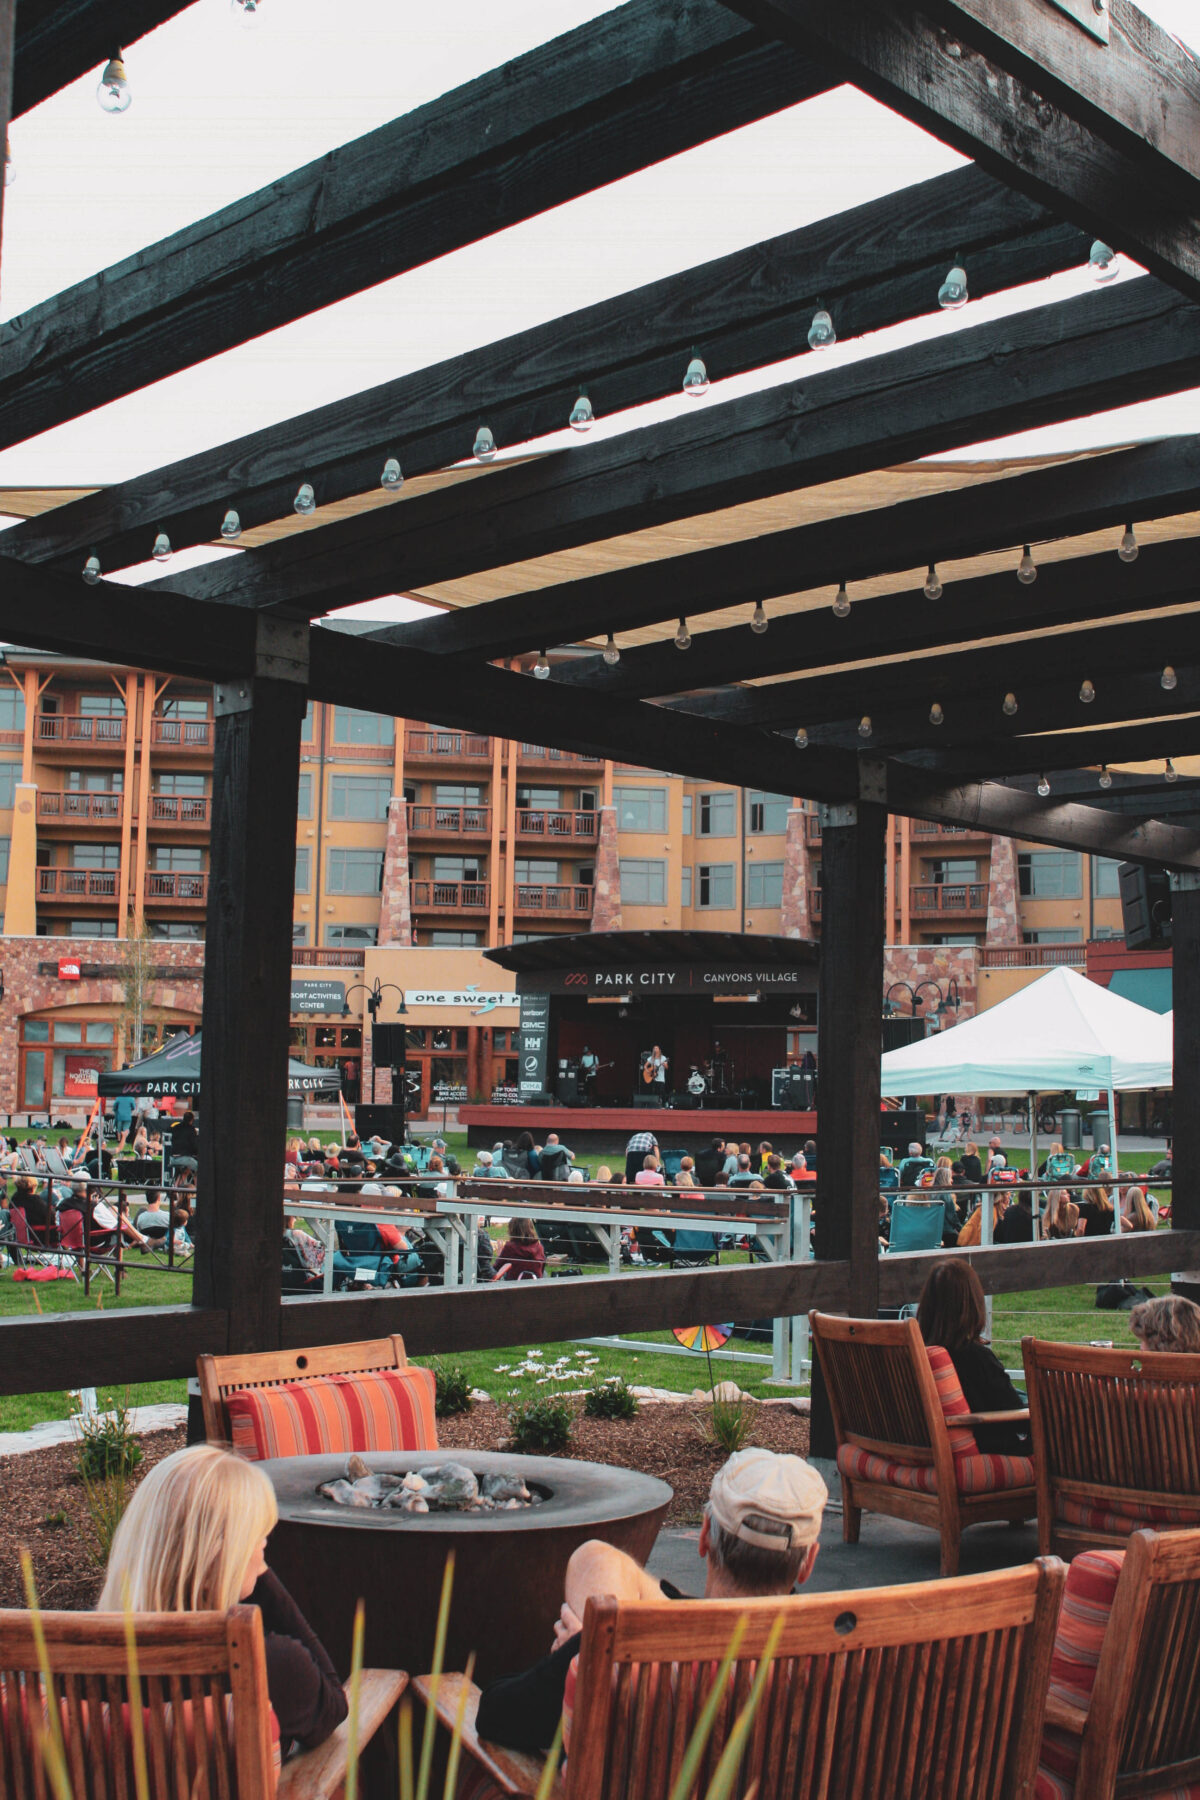 Live music on the lawn of Sundial Lodge located in Canyons Village, Park City Utah